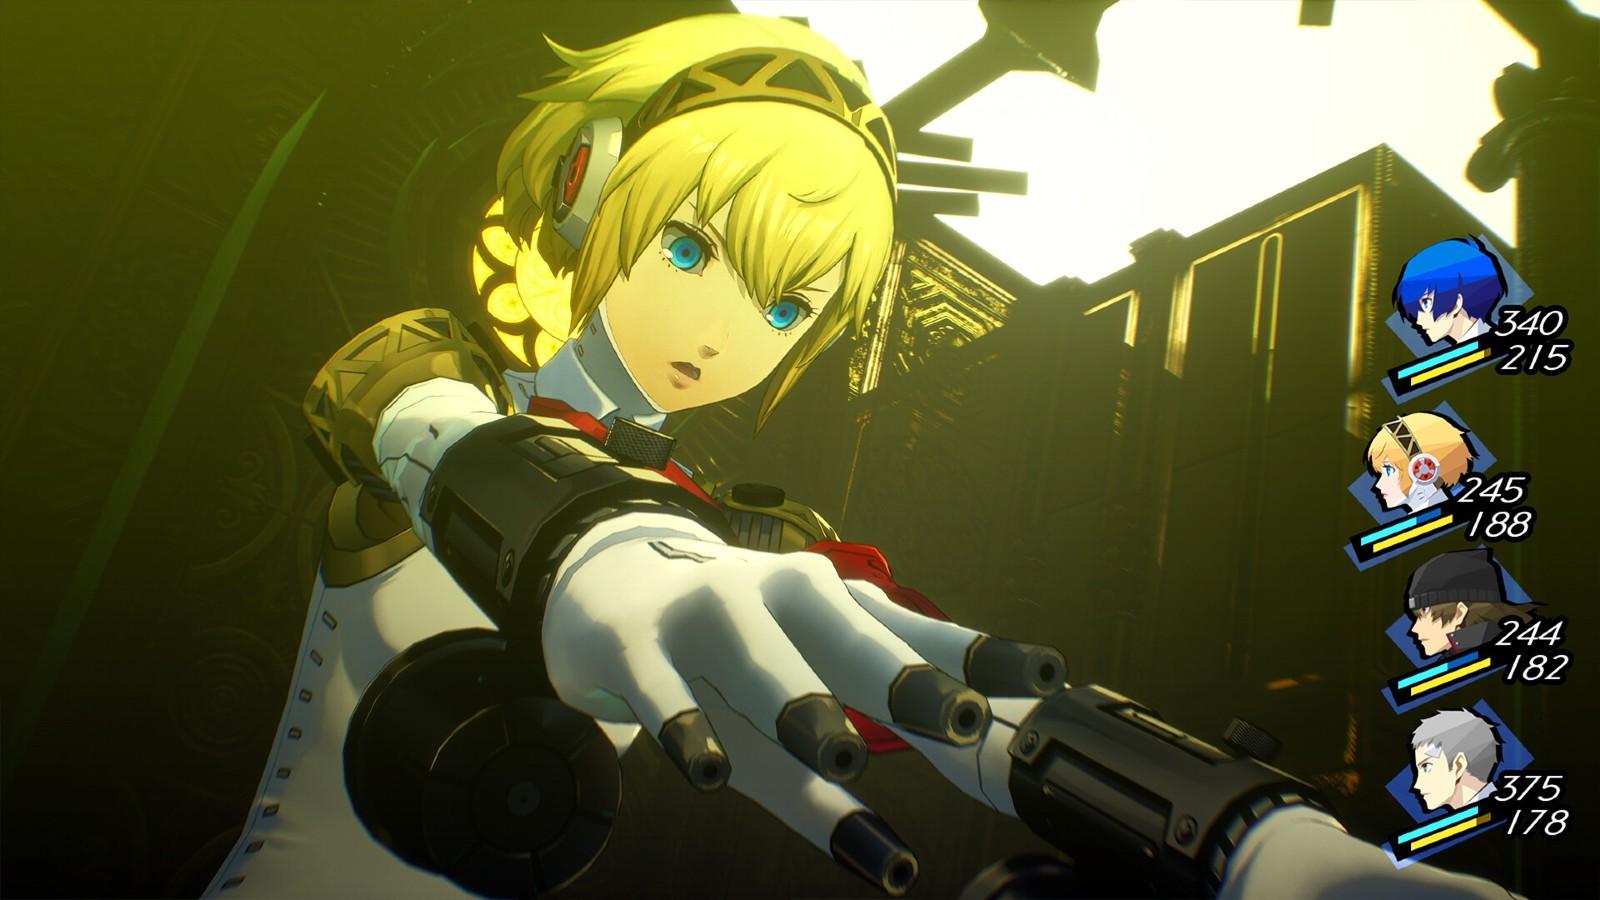 Persona 3 Reload Confirms the Use of Anti-Piracy Software Denuvo